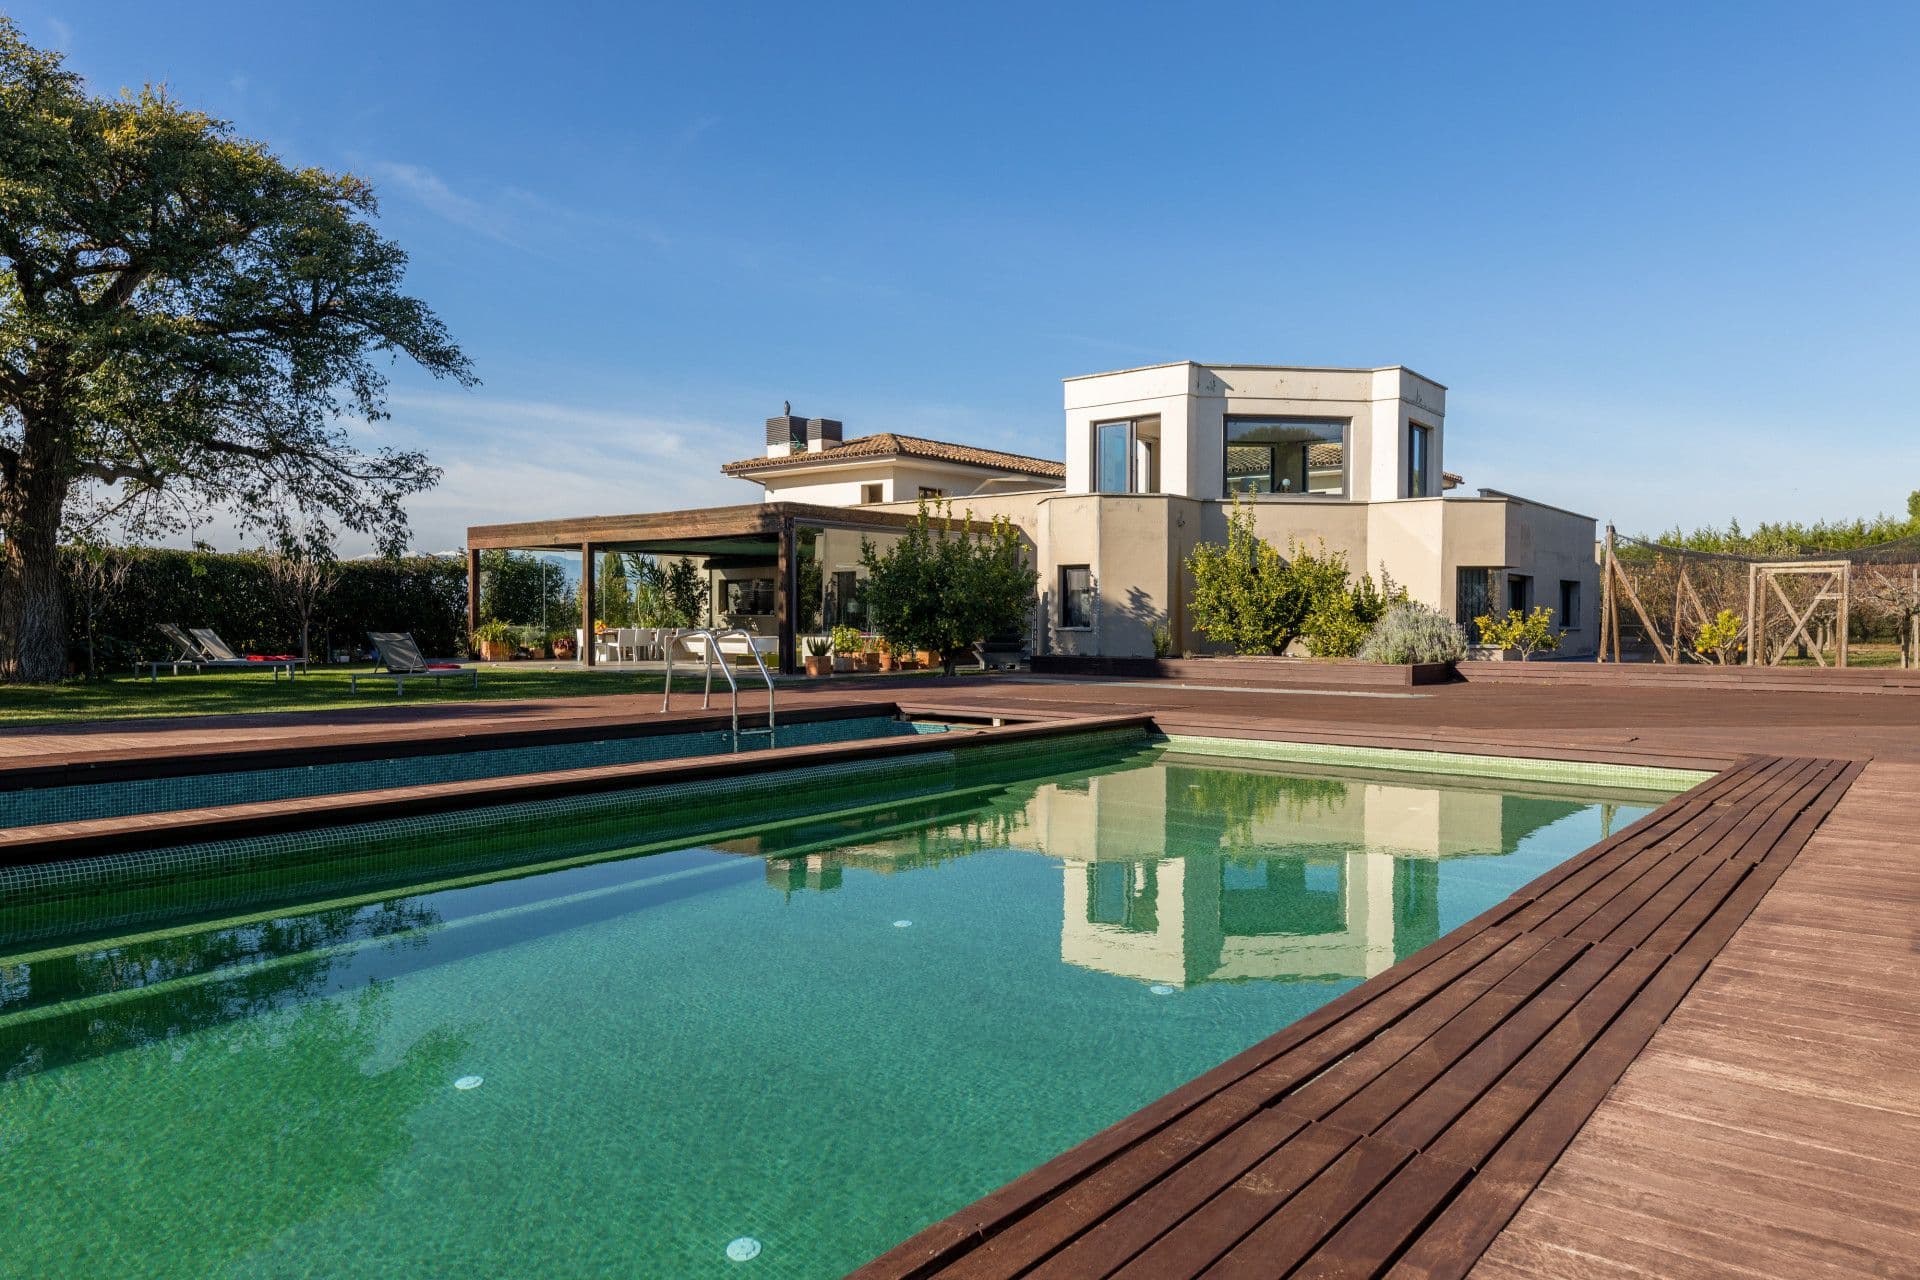 Luxurious villa overlooking the golf and the Pyrenees in Peralada, Girona.